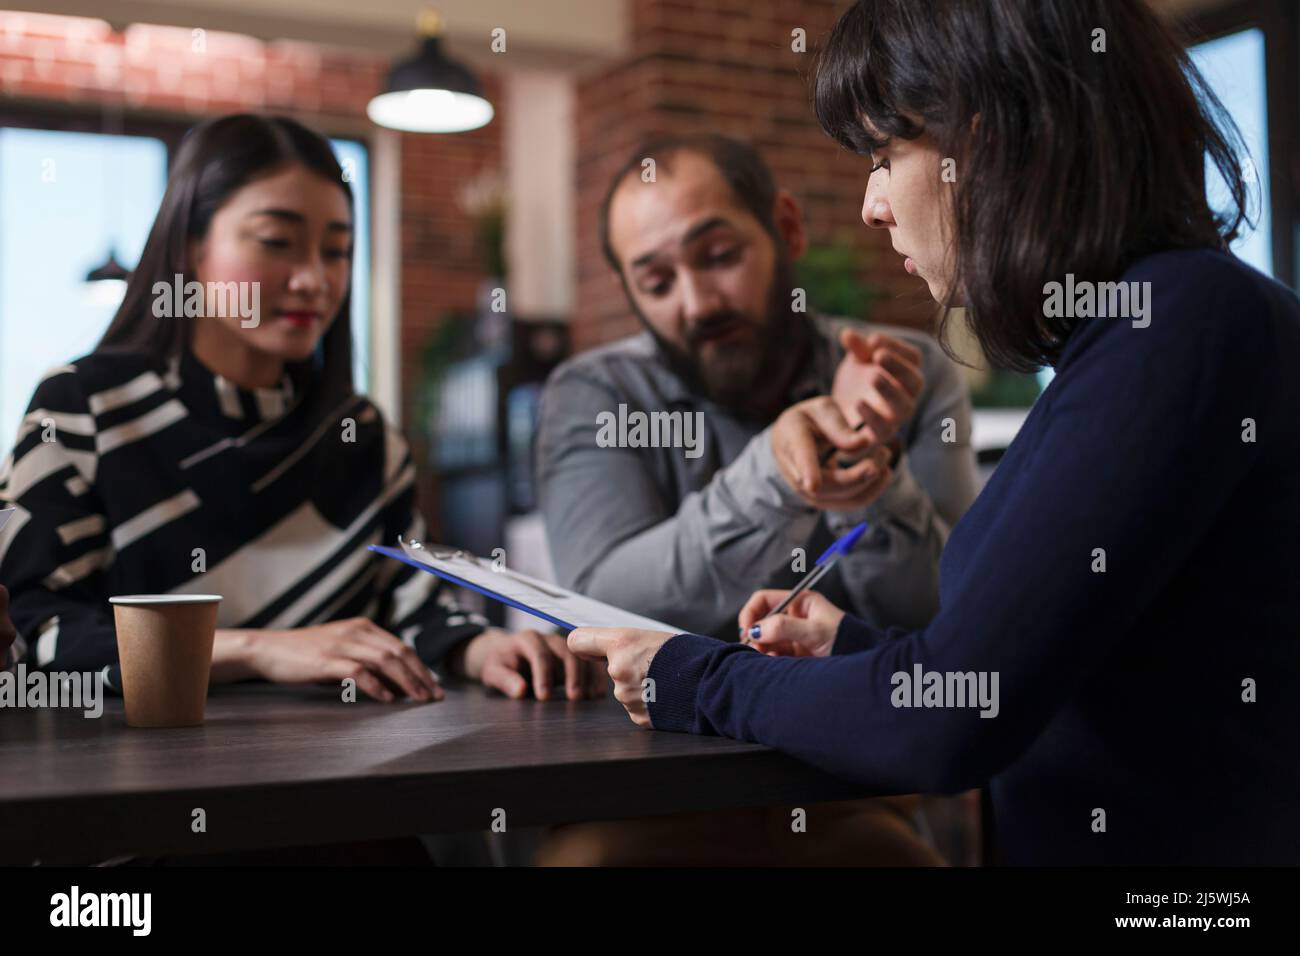 Young adult recruiter sitting at desk in office space while reviewing job applicants CVs. Multiethnic candidates talking with startup company interviewer while talking about career oportunities. Stock Photo